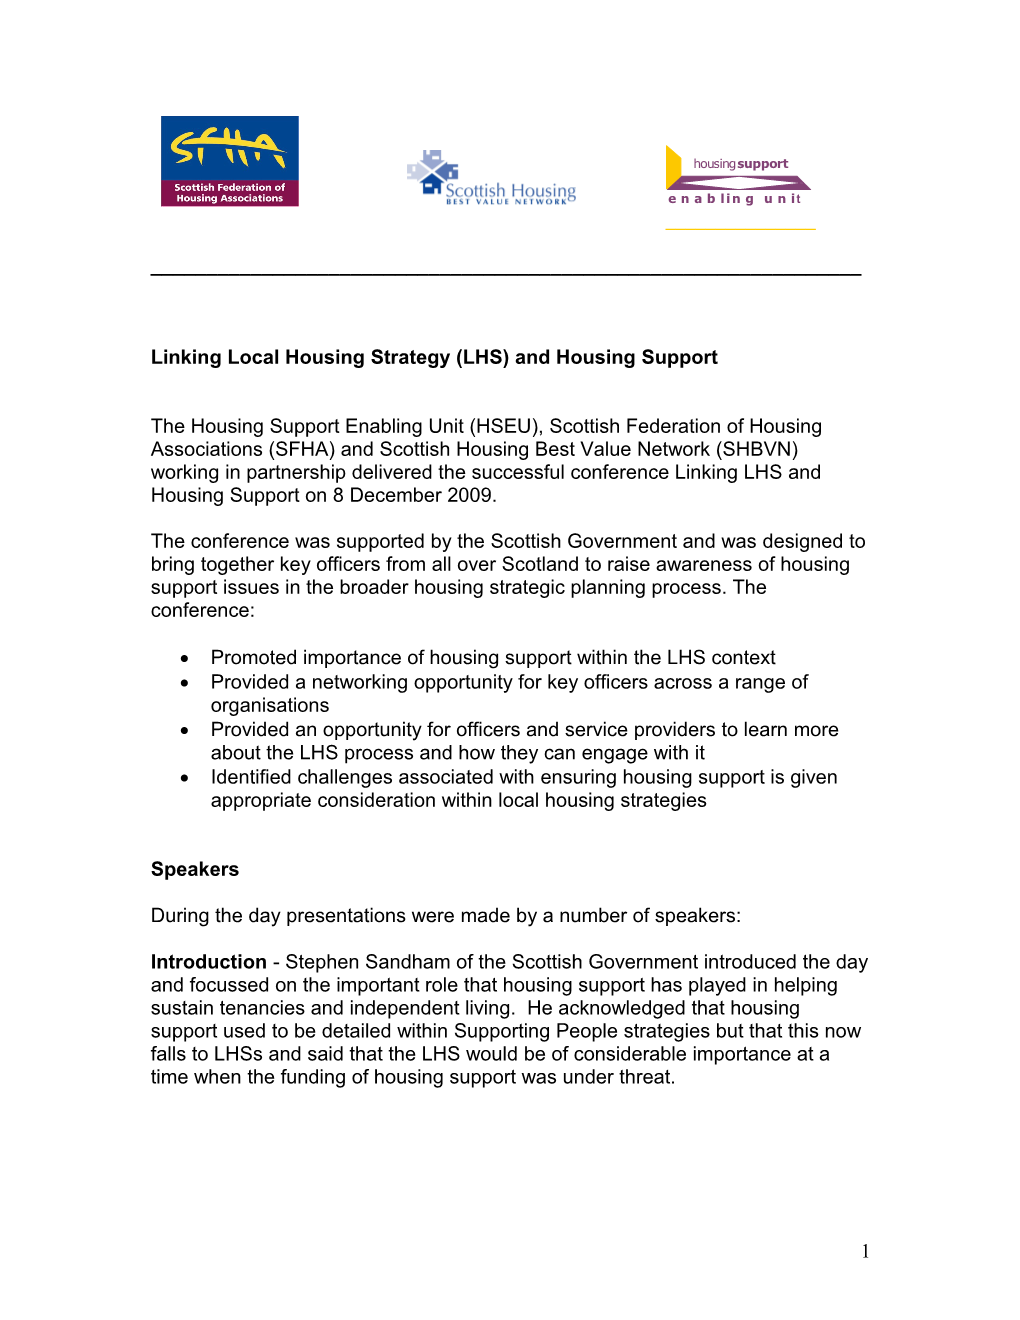 Linking Local Housing Strategy (LHS) and Housing Support